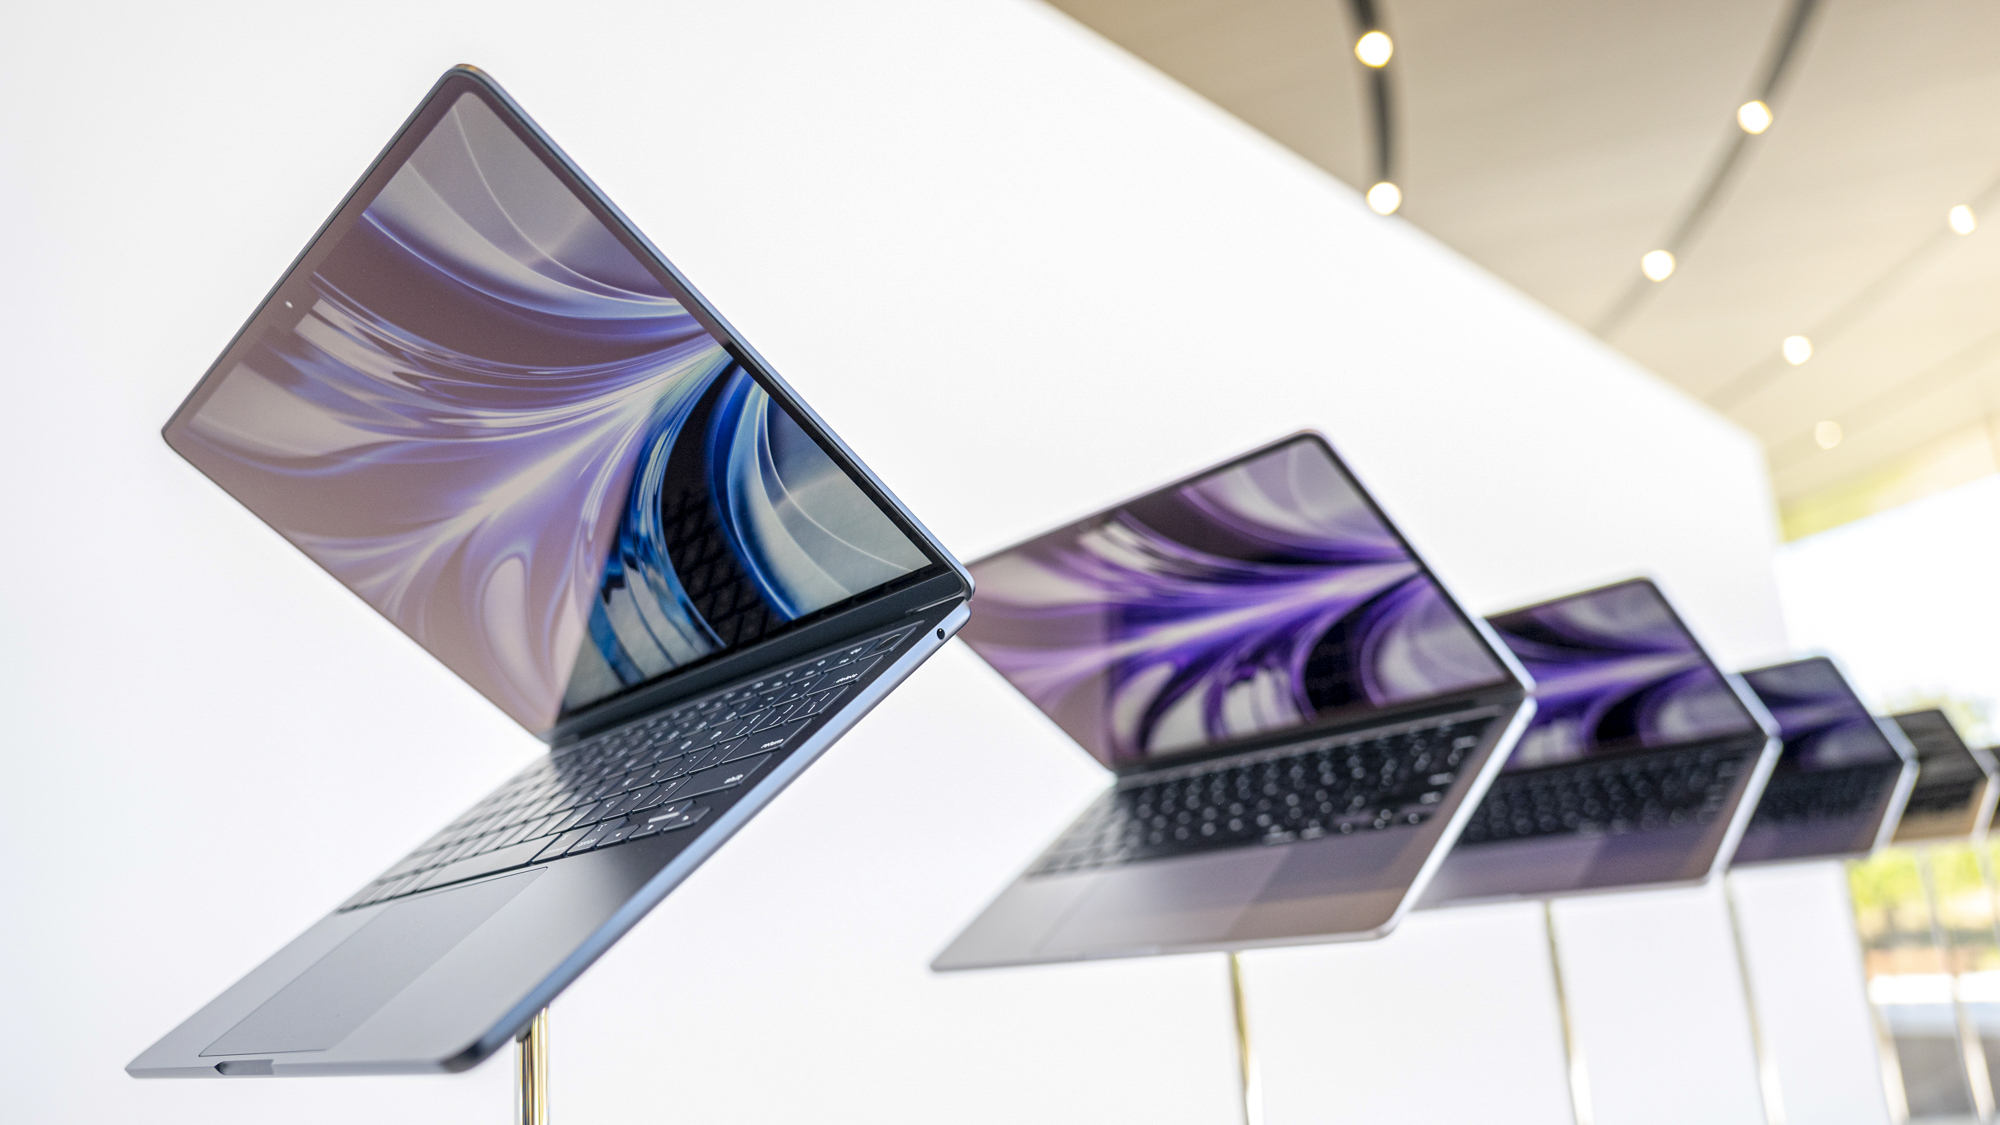 MacBook Air 2022 unveiled at Apple Worldwide Developers Conference 2022